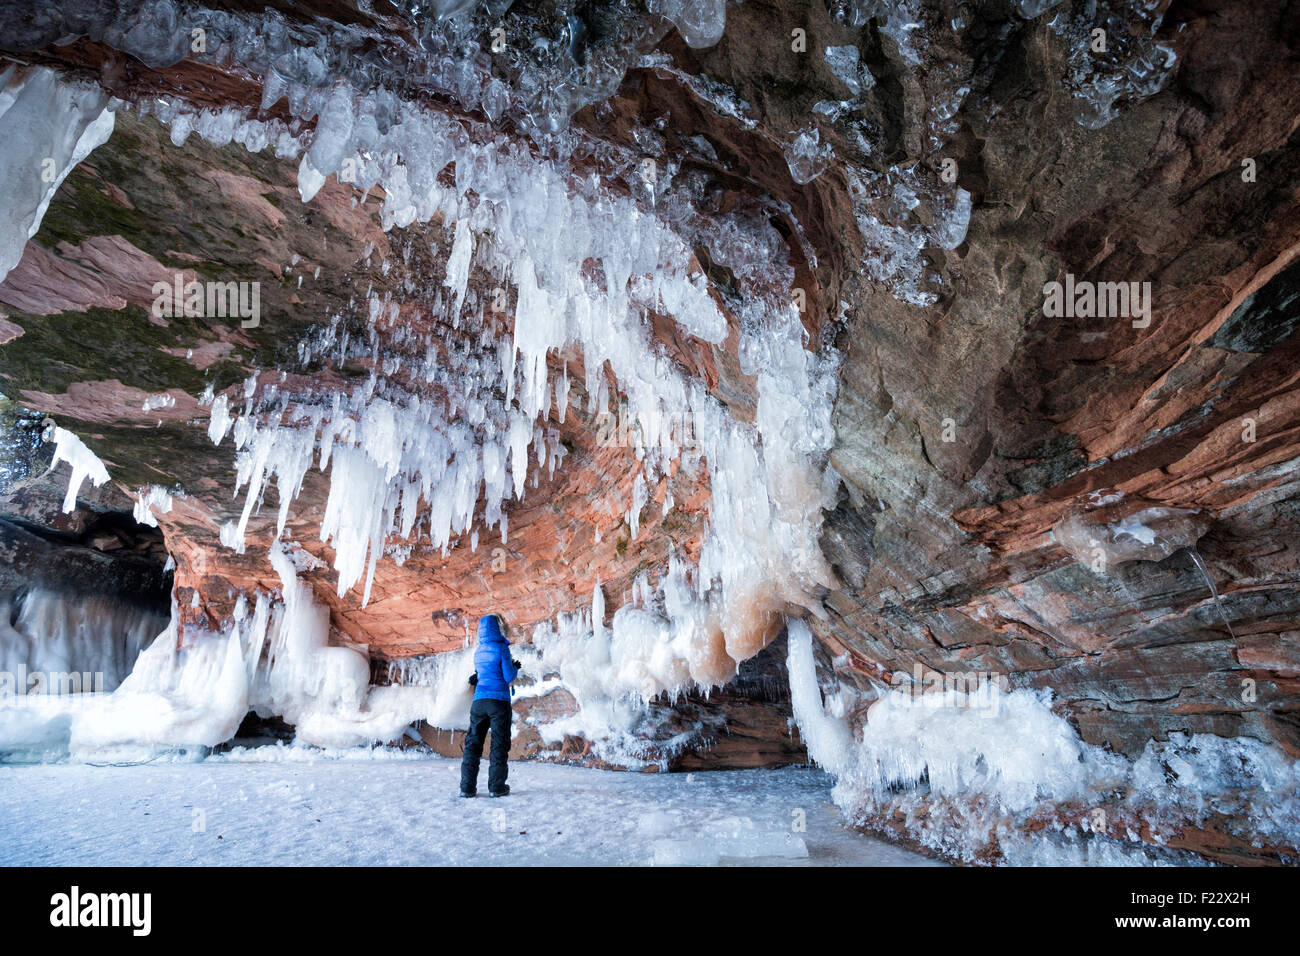 One person standing under sandstone ceiling of an ice cave at Apostle Island National Lakeshore, Cornucopia, Bayfield County, Wi Stock Photo